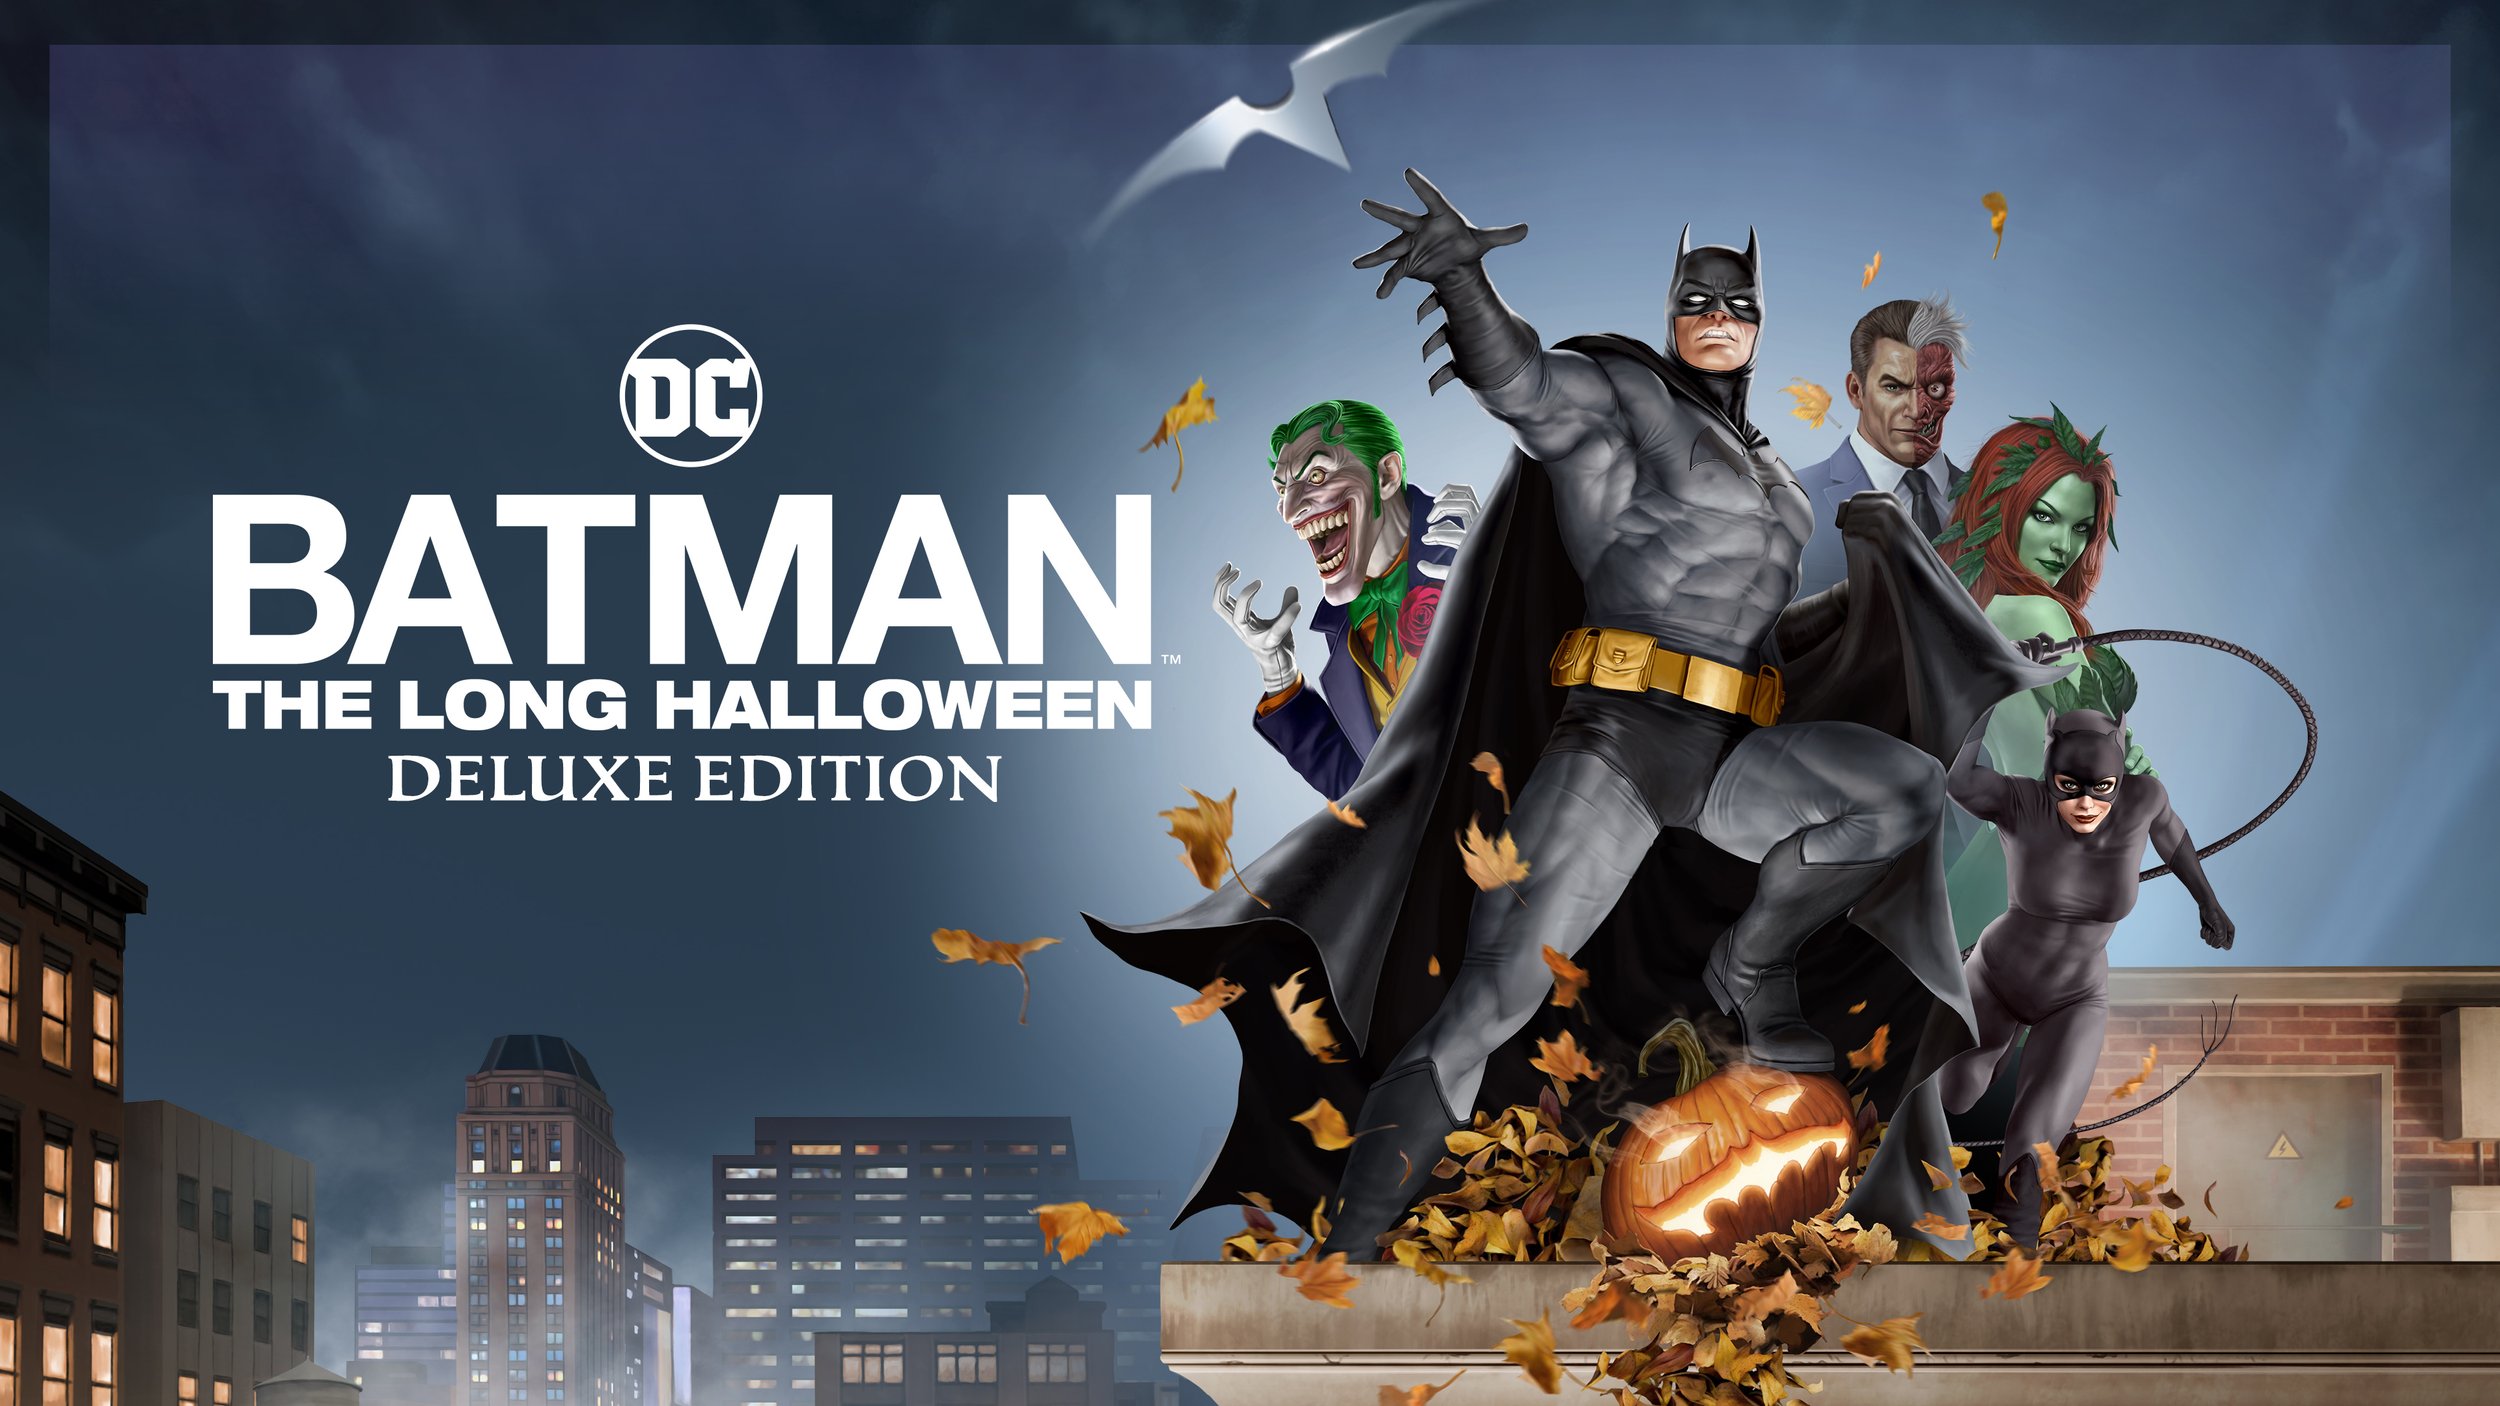 Batman: The Long Halloween Deluxe Edition with screenwriter Tim Sheridan —  The Extras